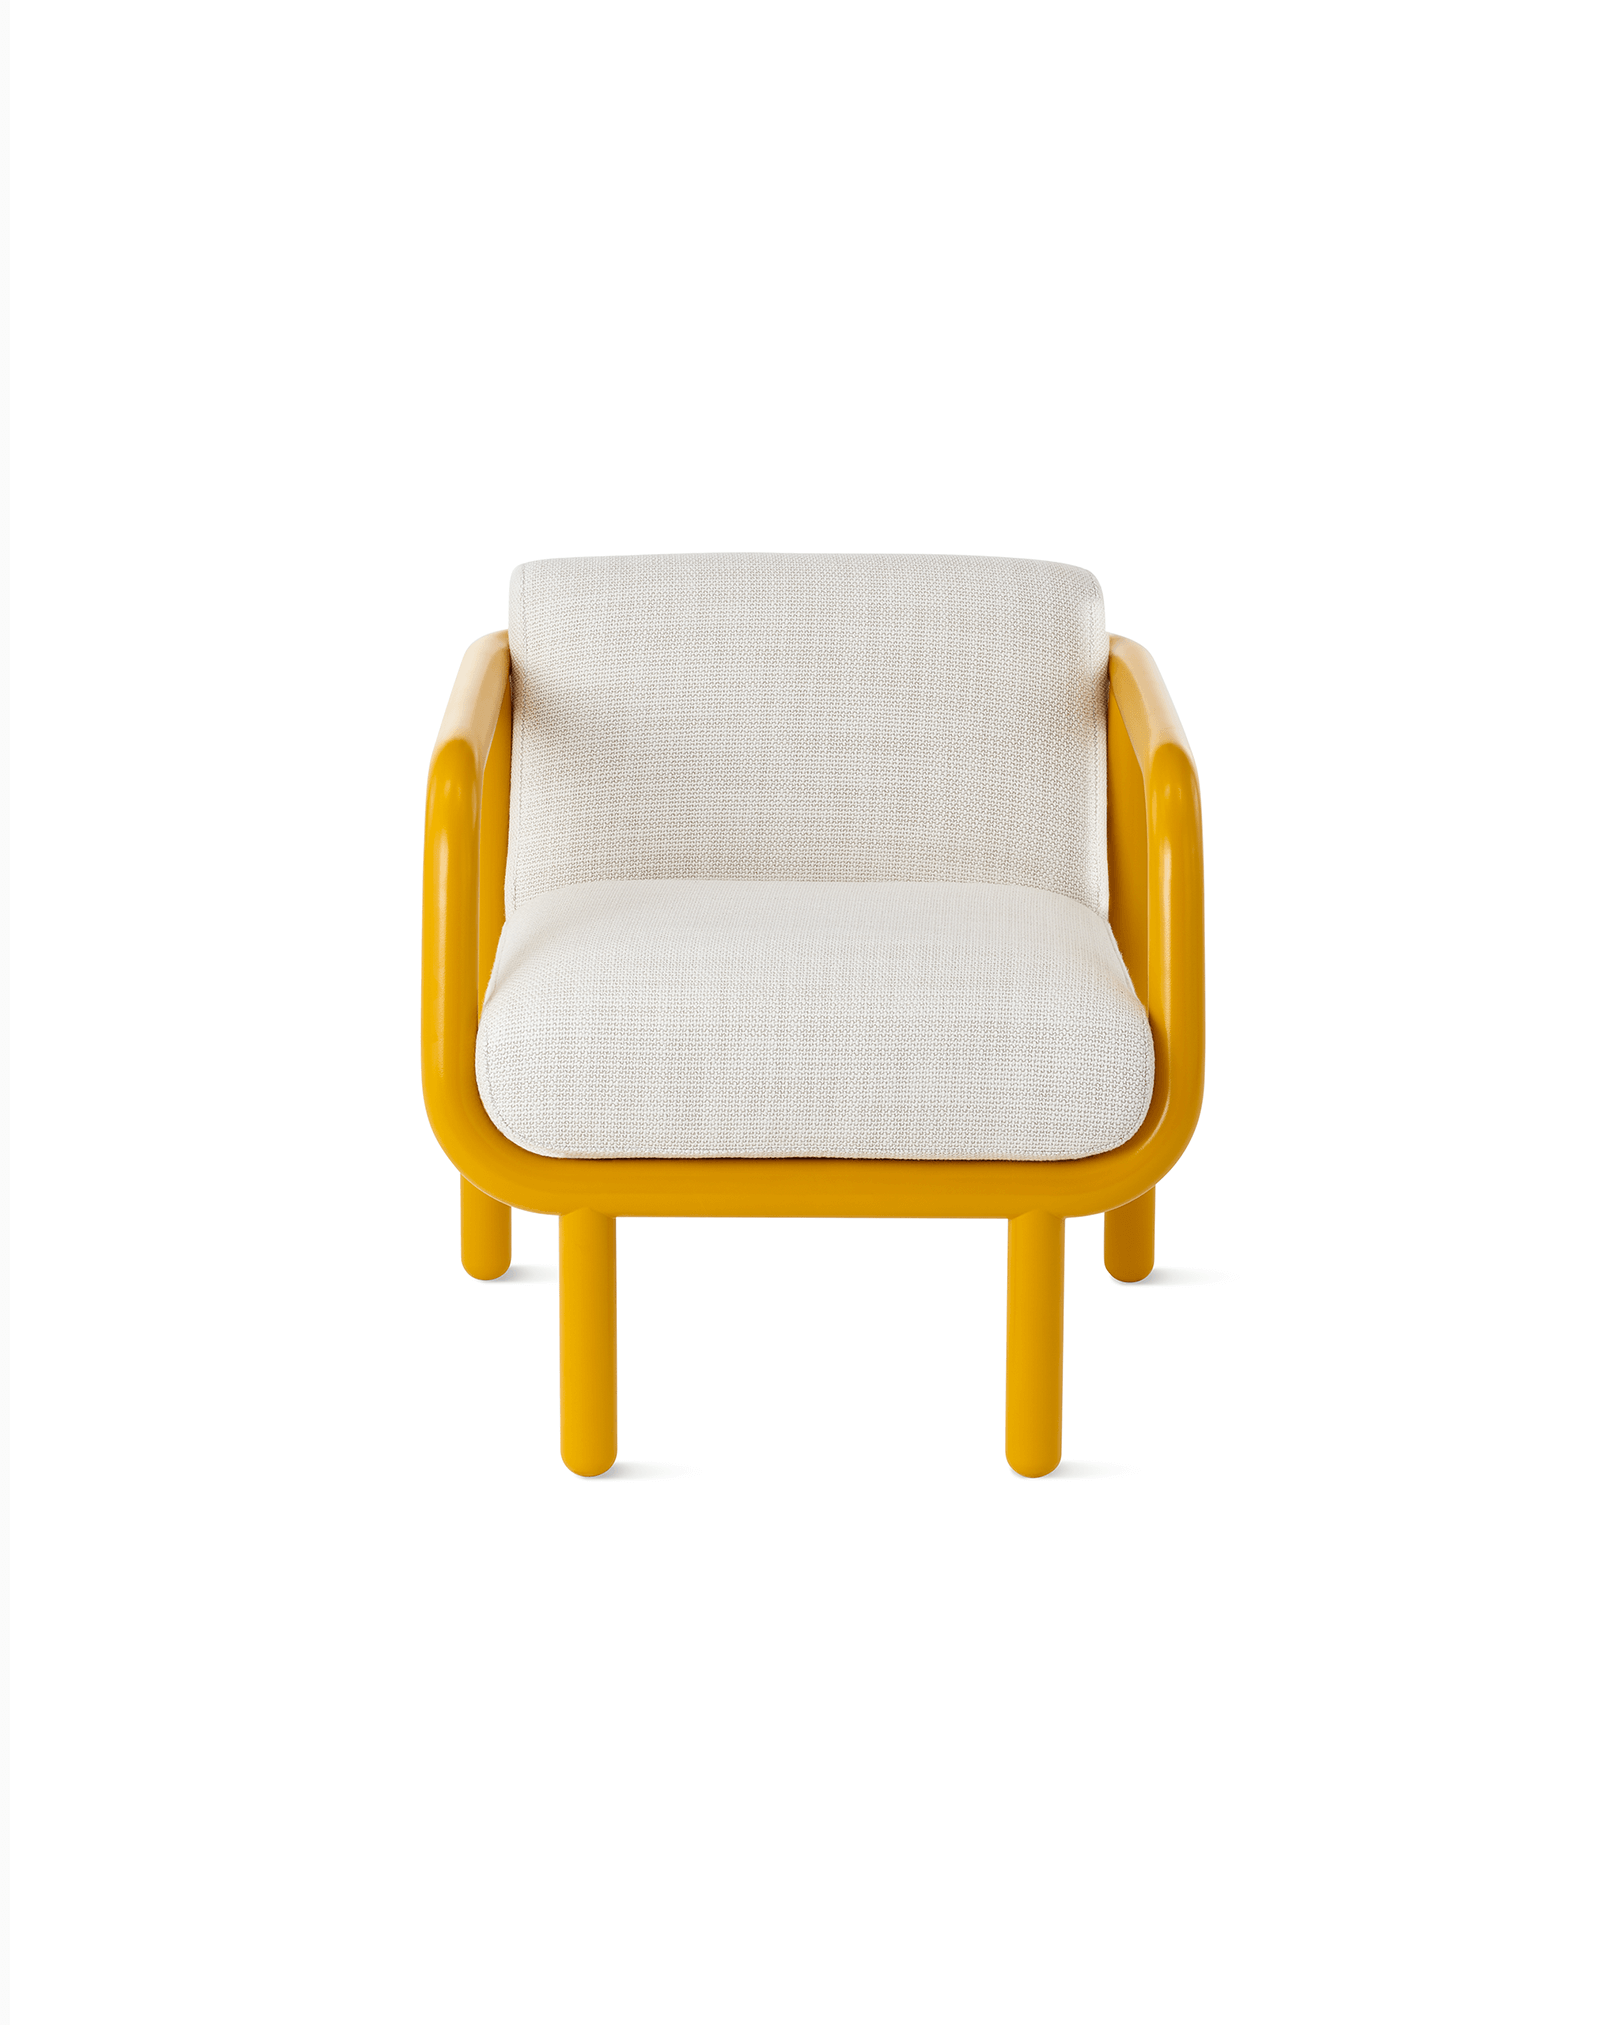 beige and yellow Percy lounge chair in white background